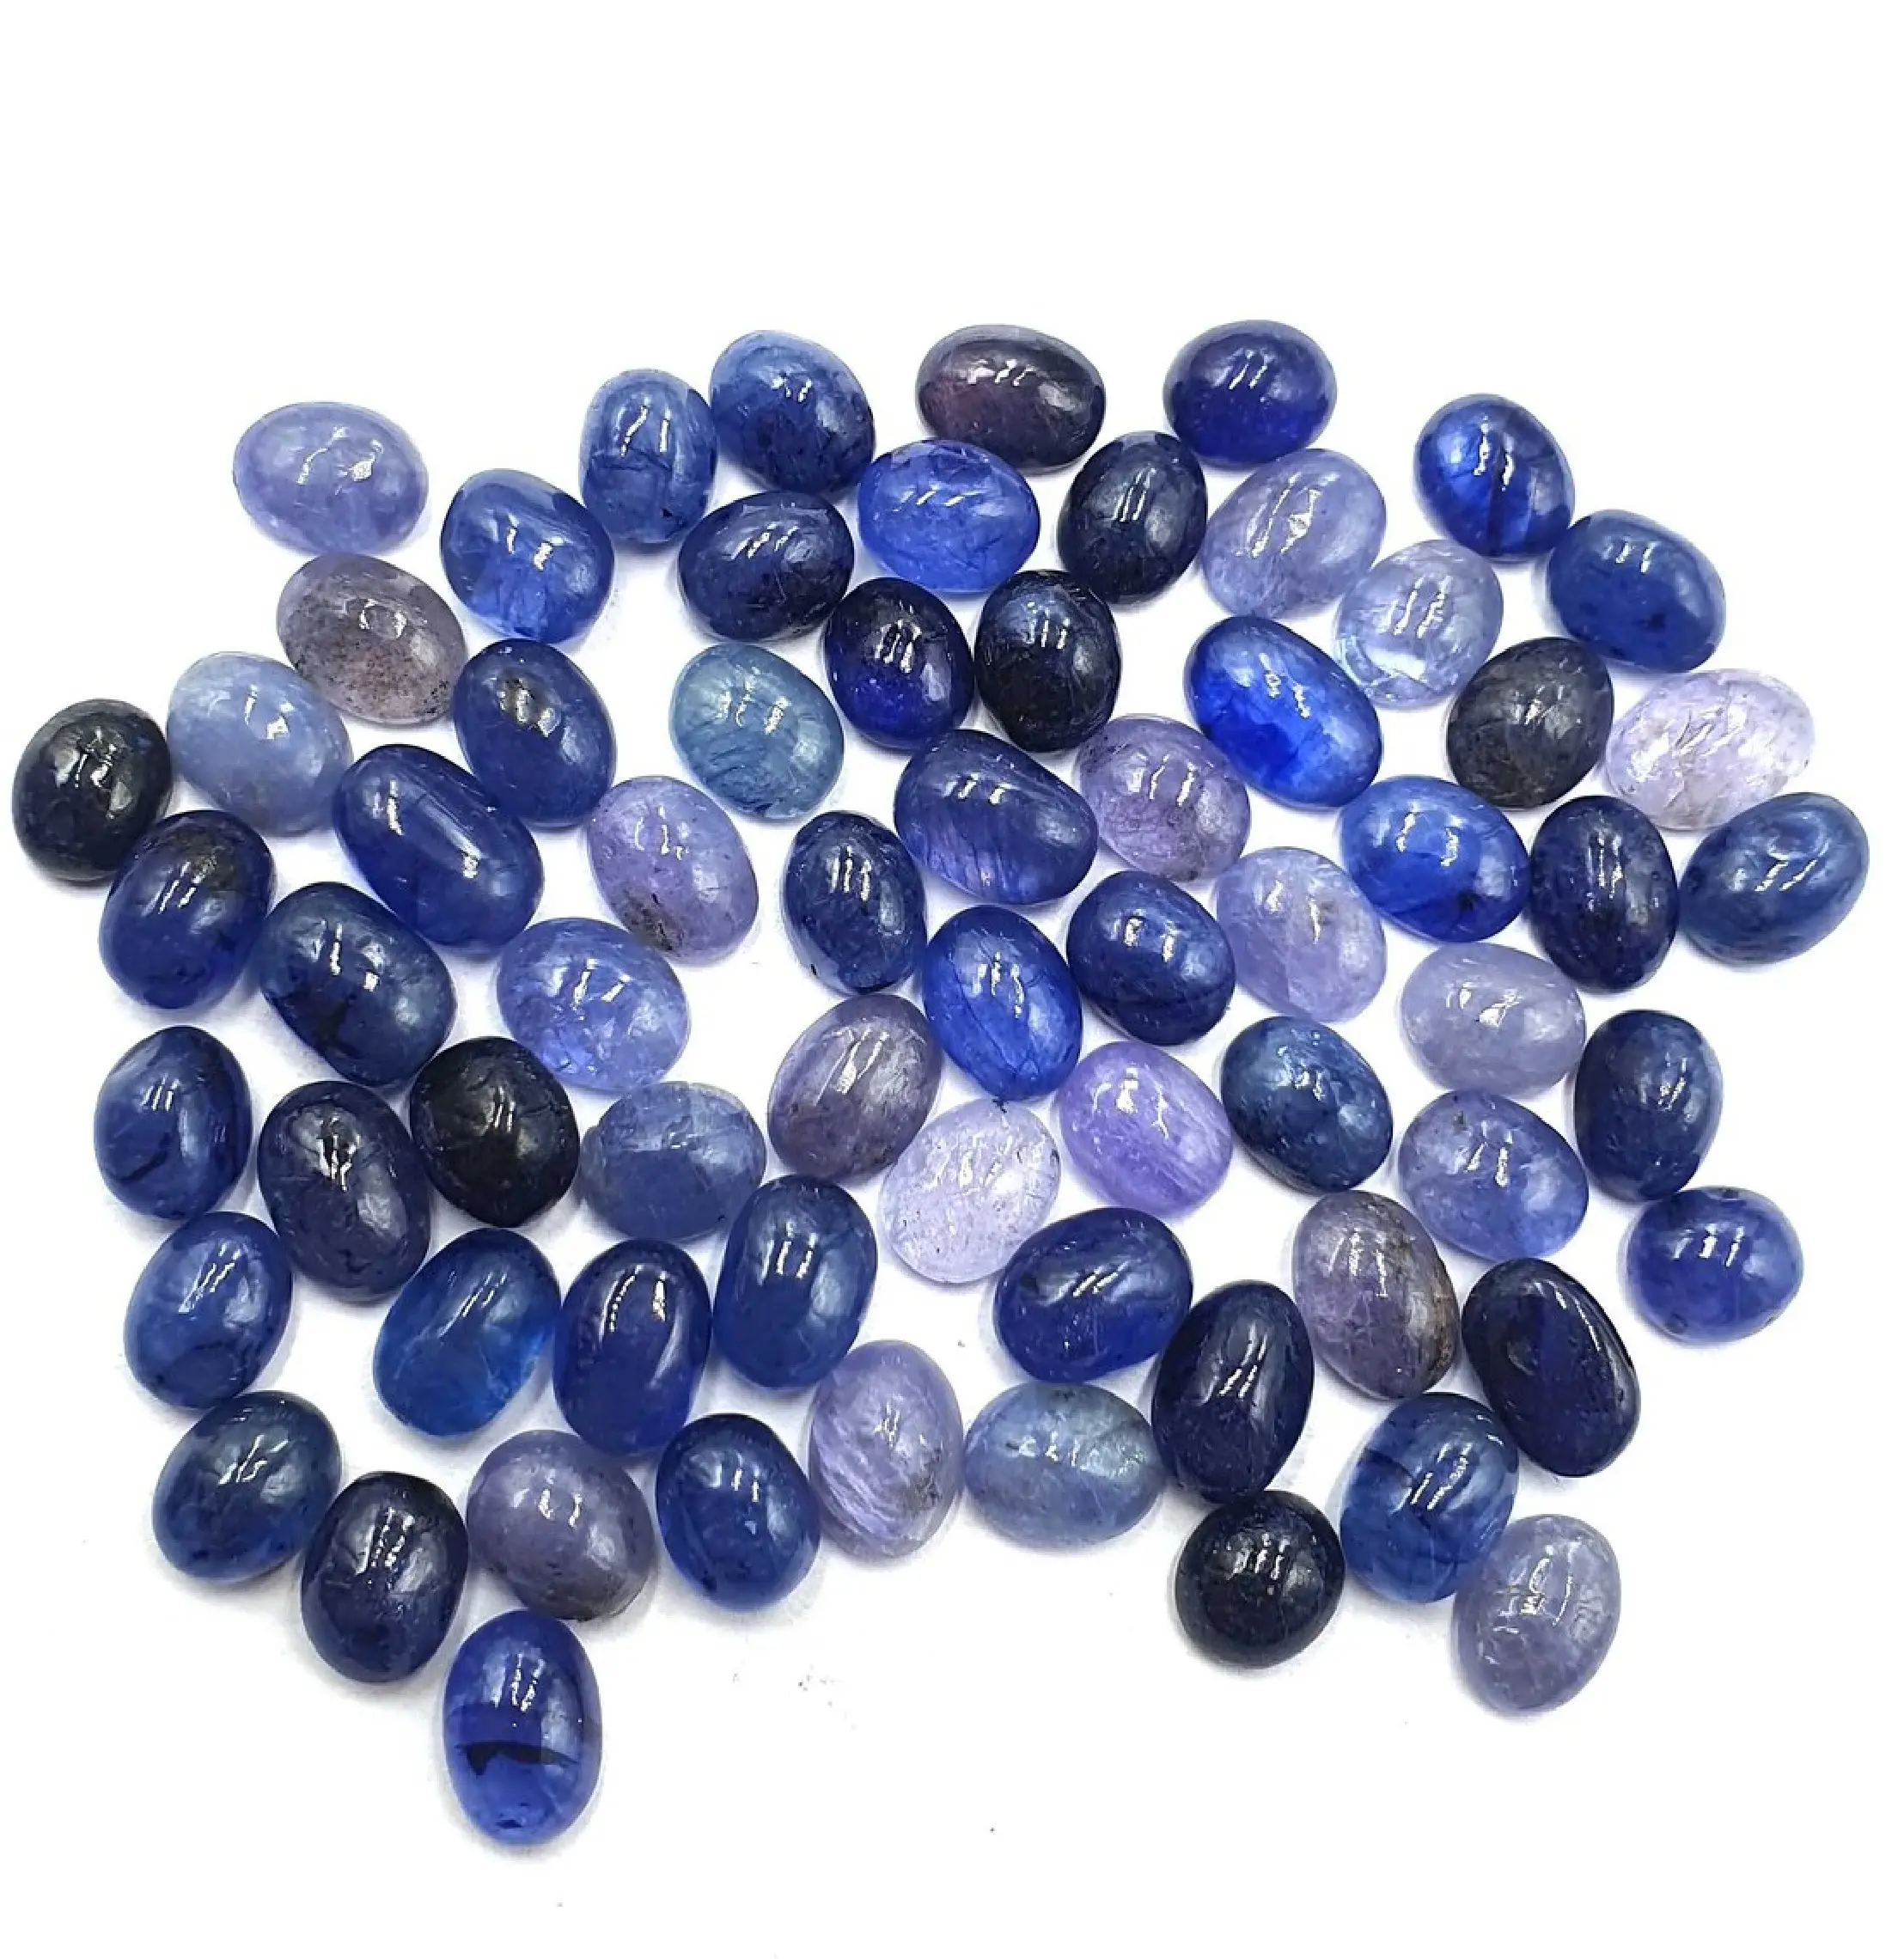 Loose Cabochon Cut Smooth Oval Shape Mineral Sapphire Gemstones Wholesale Tumble Stone